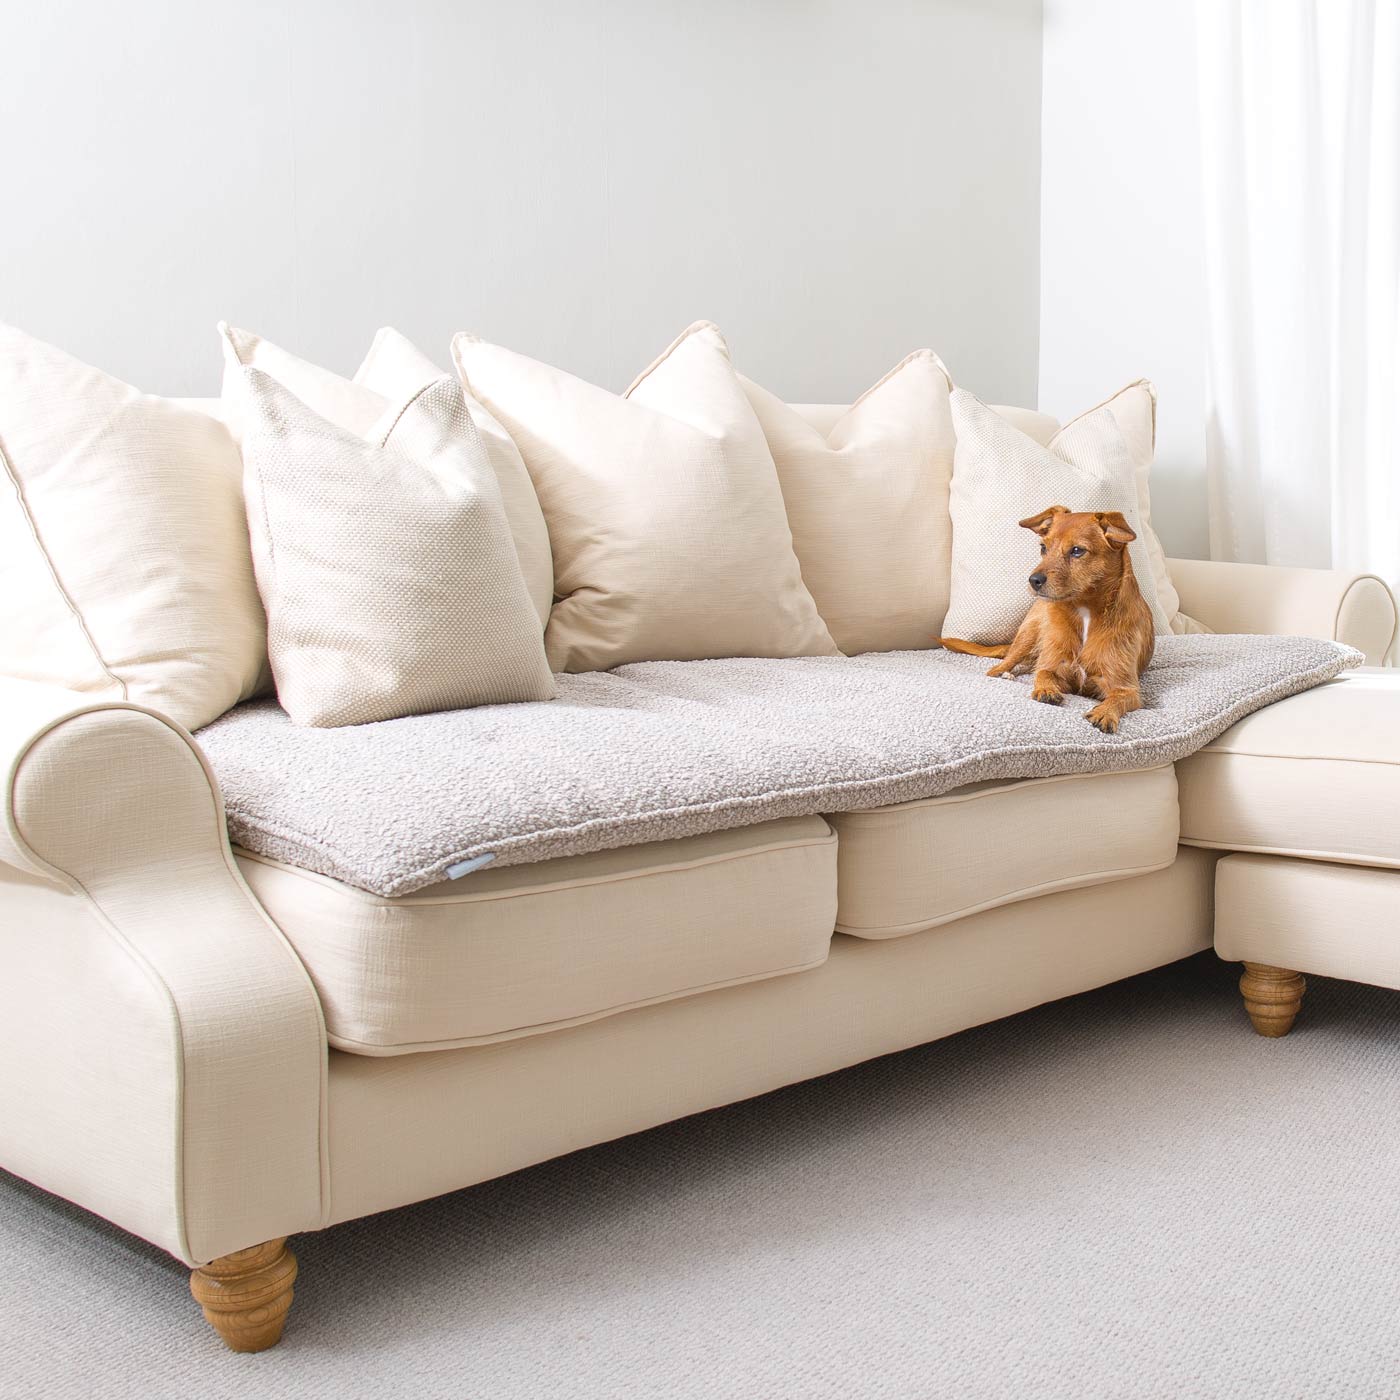 [colour:Mink boucle] Discover Our Luxury Boucle sofa Topper, The Perfect Pet sofa Accessory In Stunning Mink! Available Now at Lords & Labradors